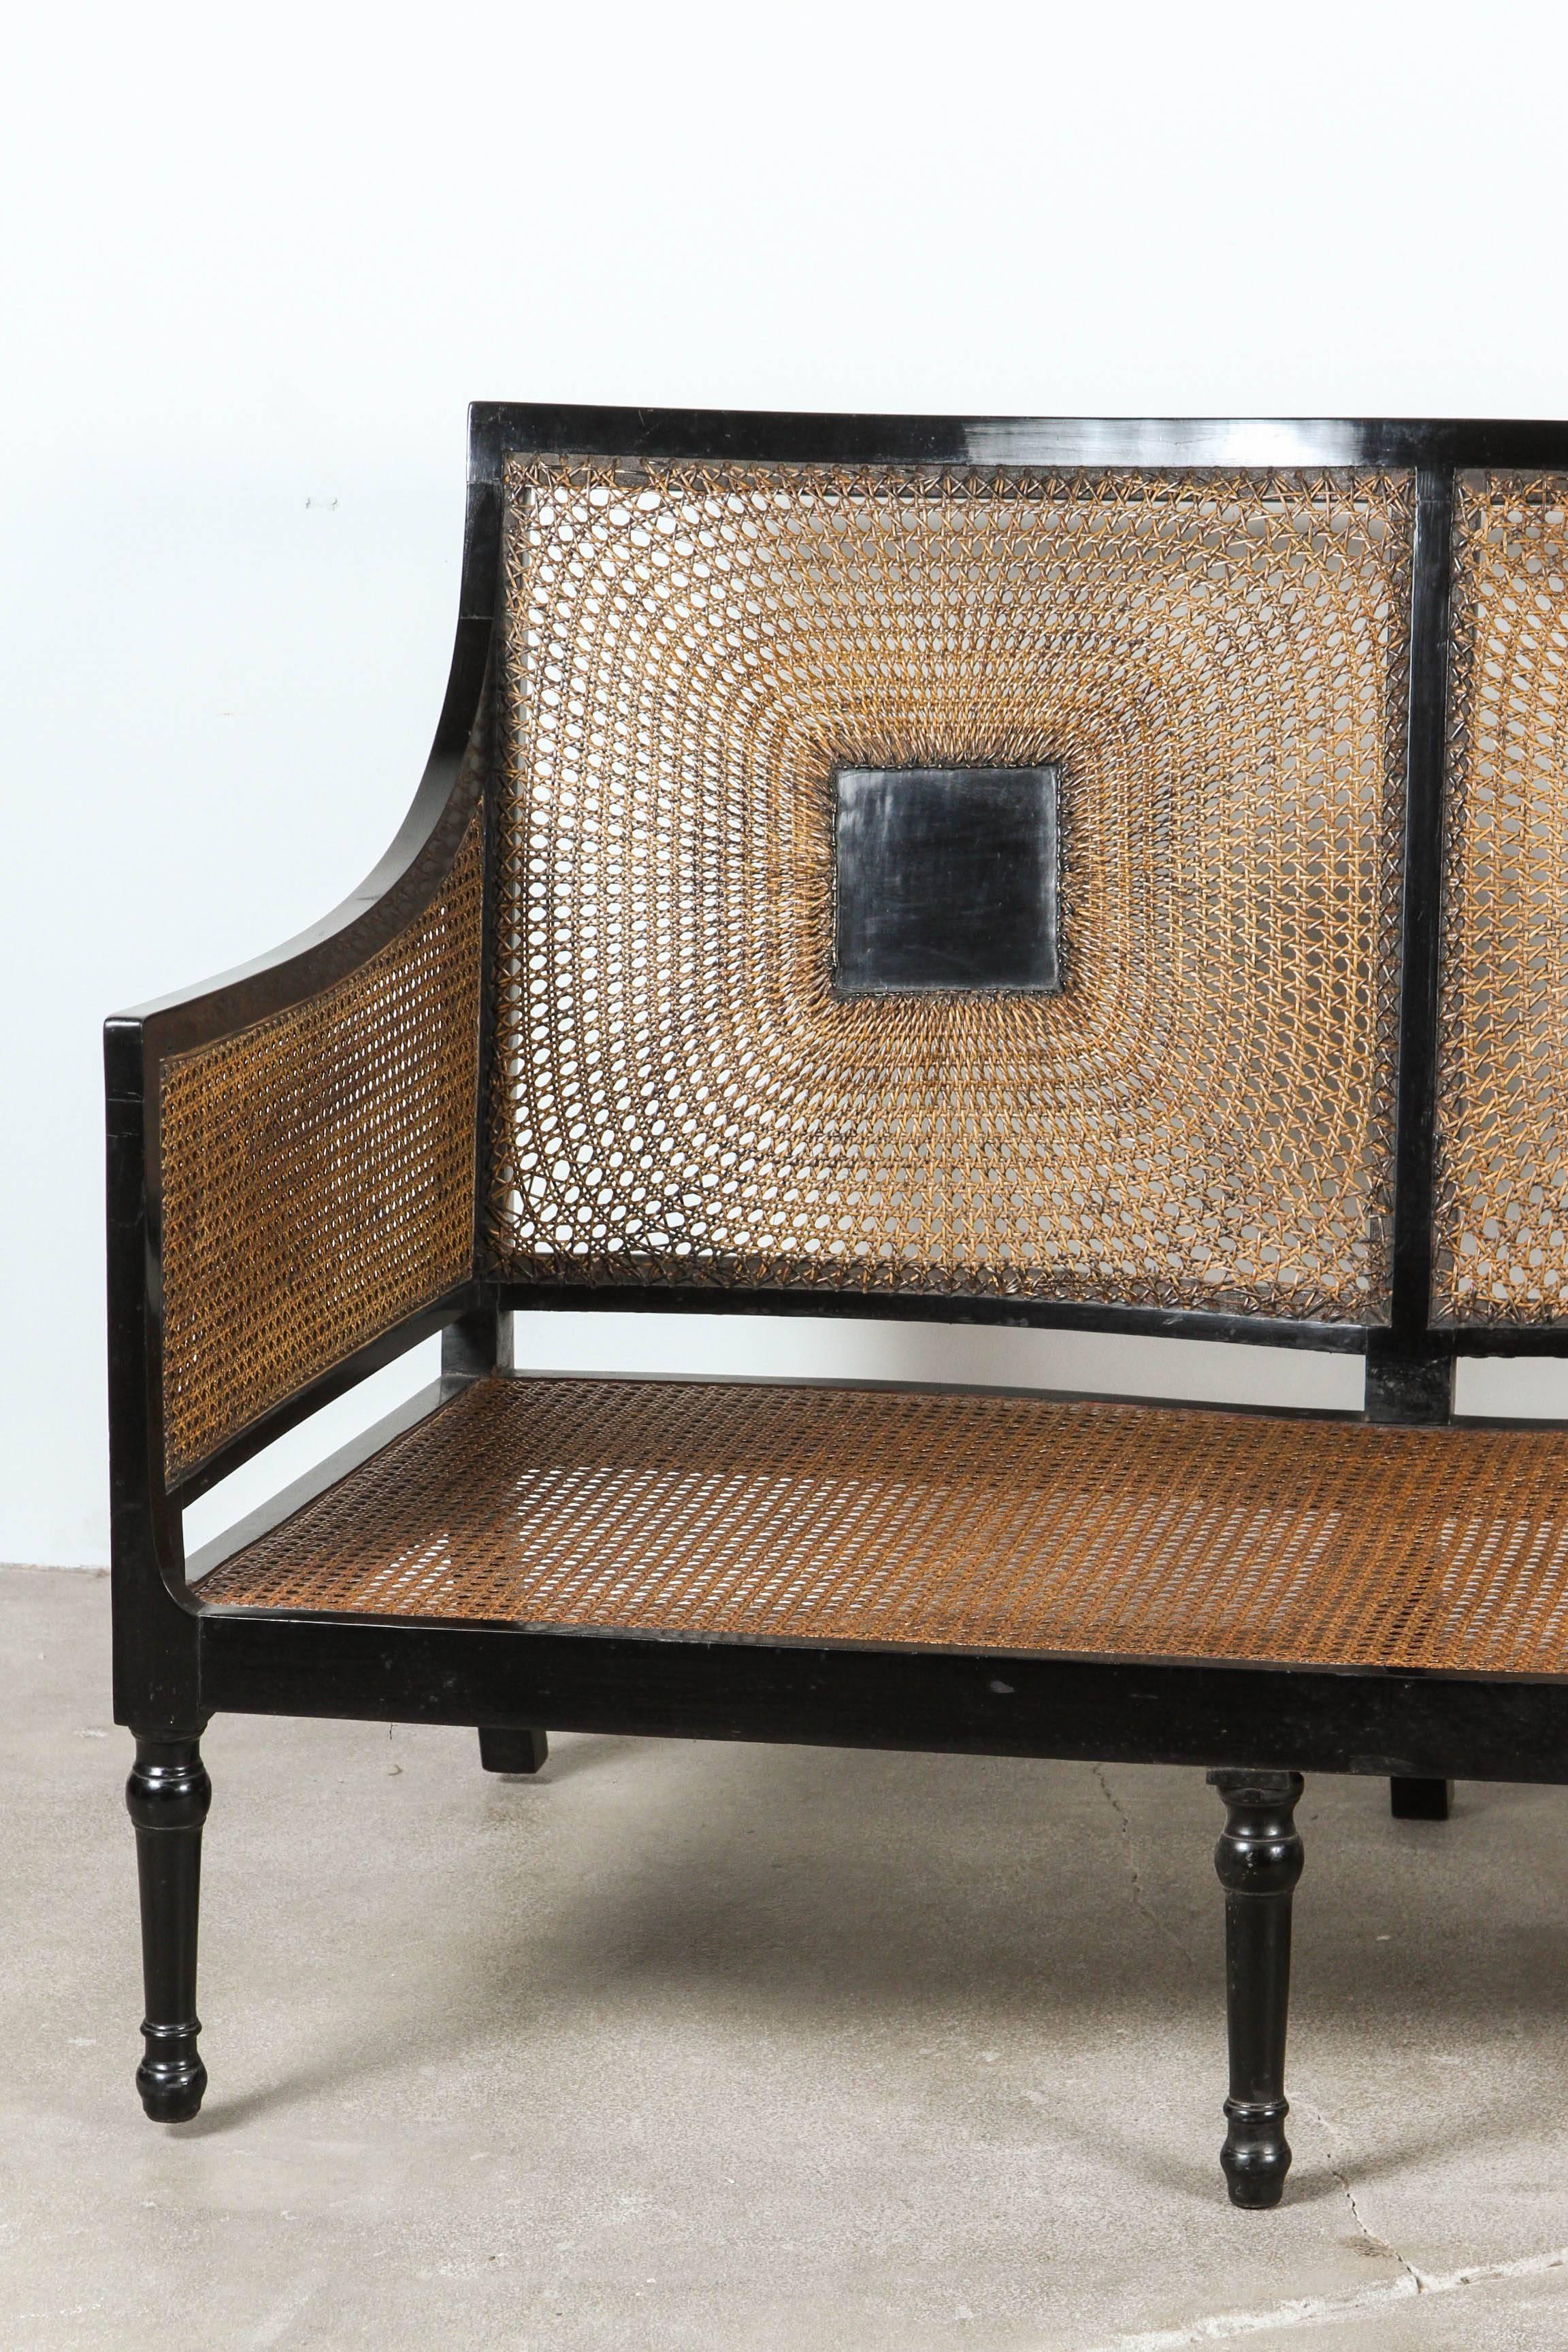 Italian black framed caned bench with intricate caned details on the back.